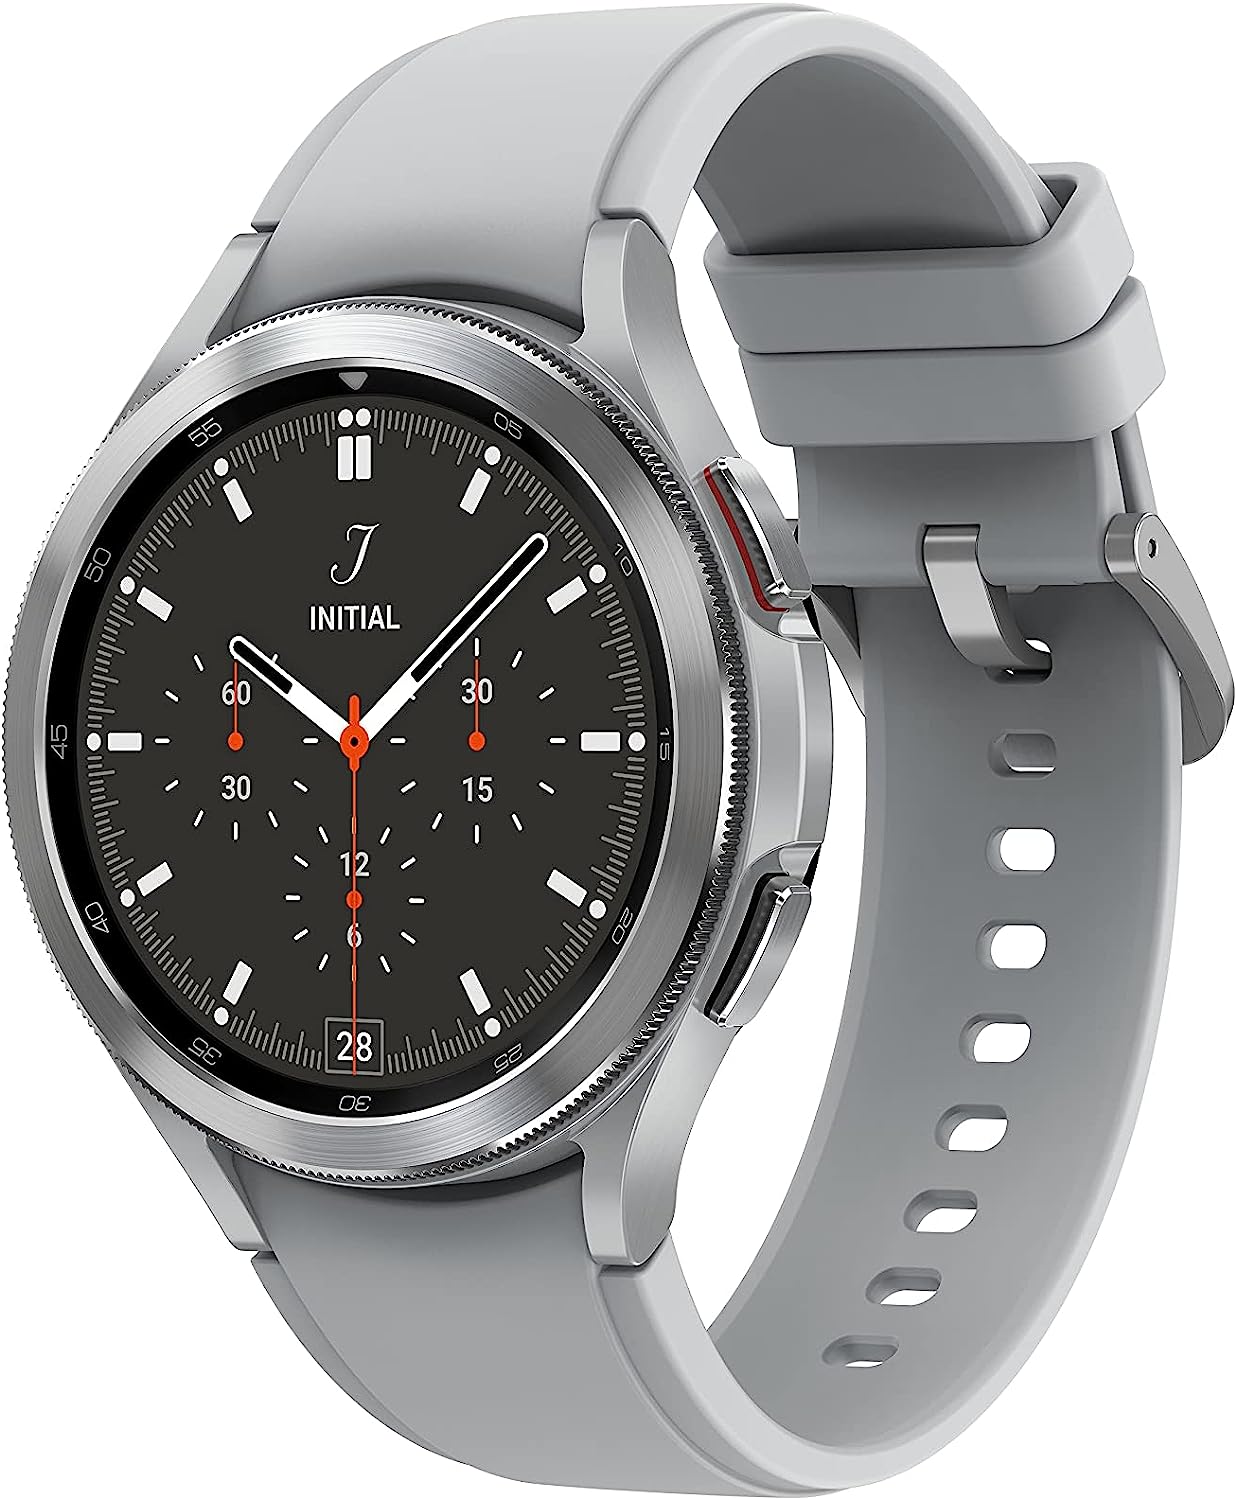 Samsung Galaxy Watch 4 Spotted Selling for Close to Half Its Price Ahead of Independence Day Sale